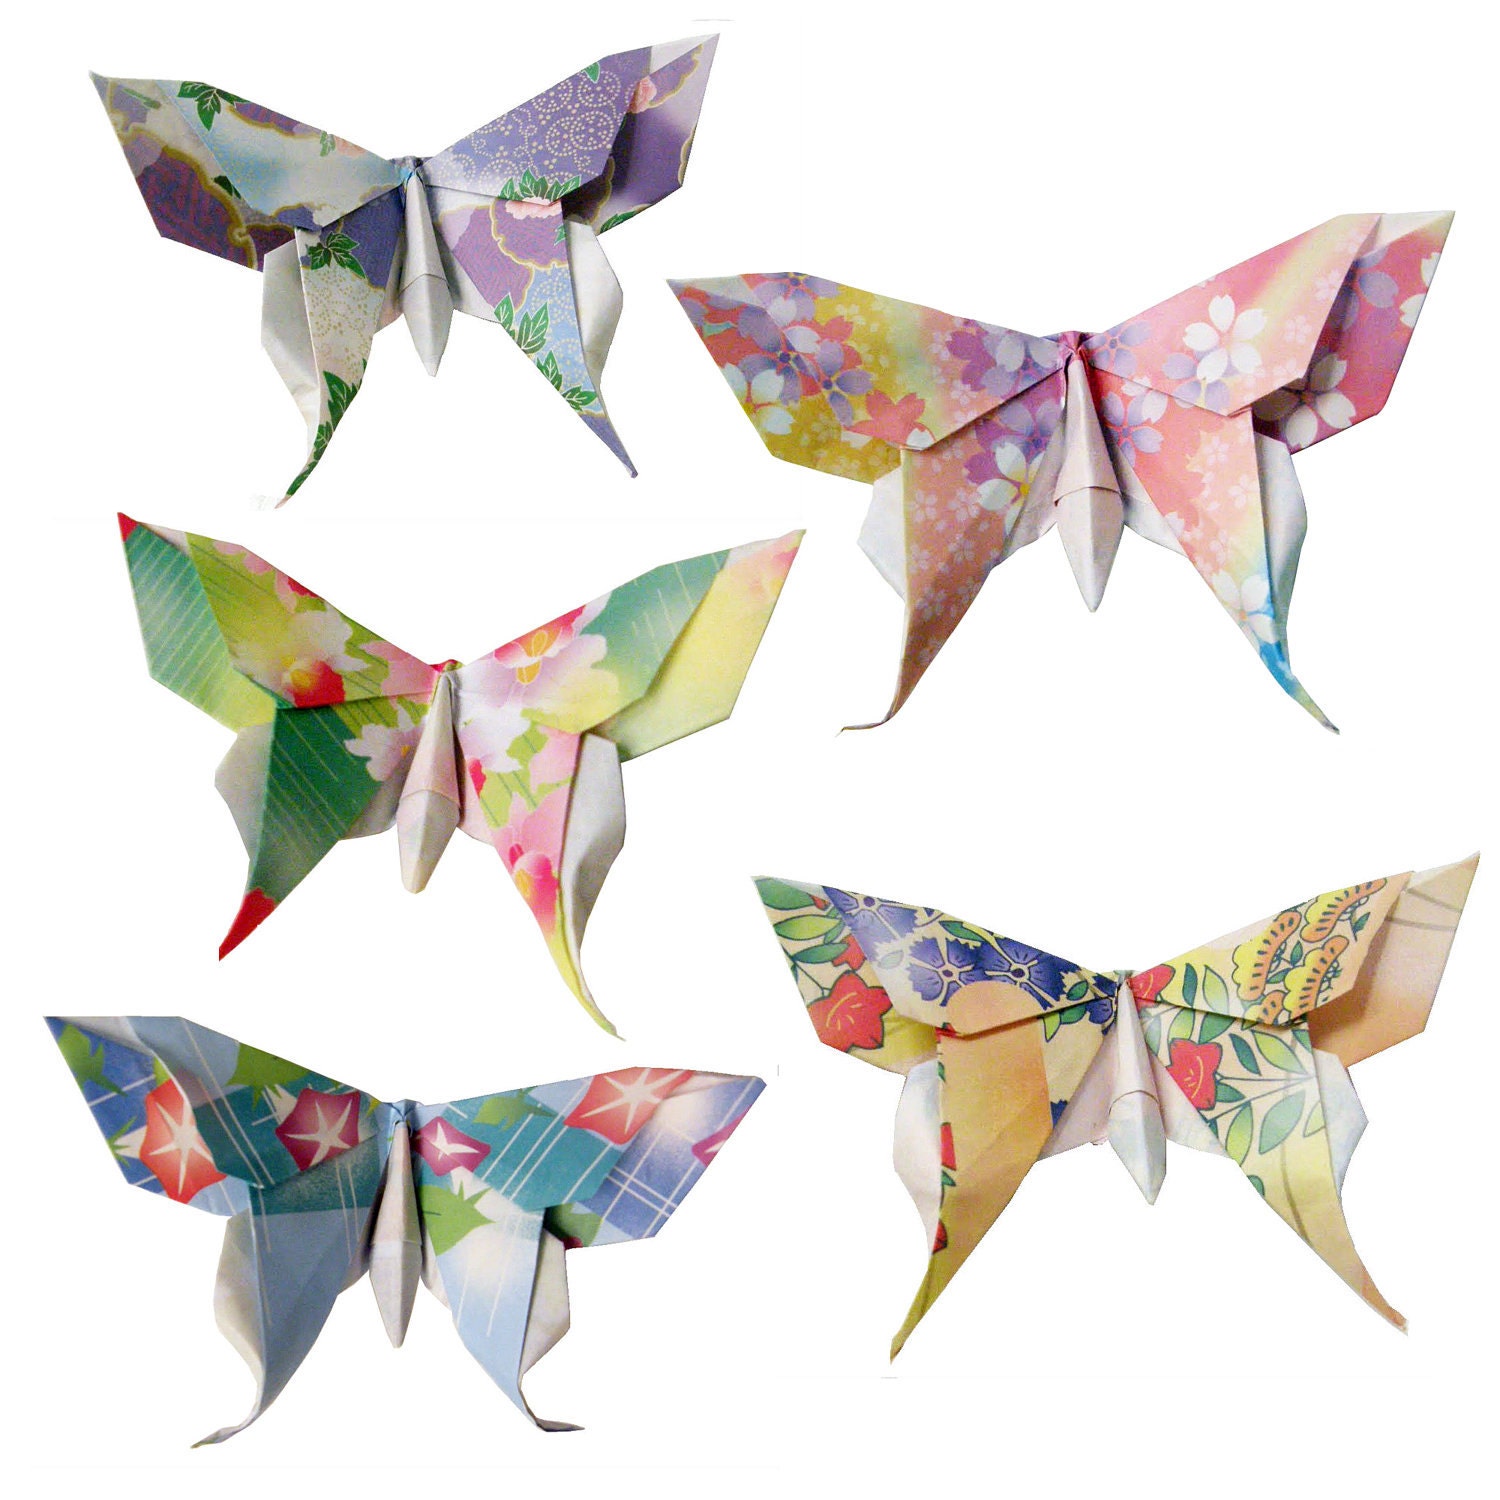 20 Small Swallowtail 3D Origami Butterflies (Floral Print)  - Great for Name or Placement Cards